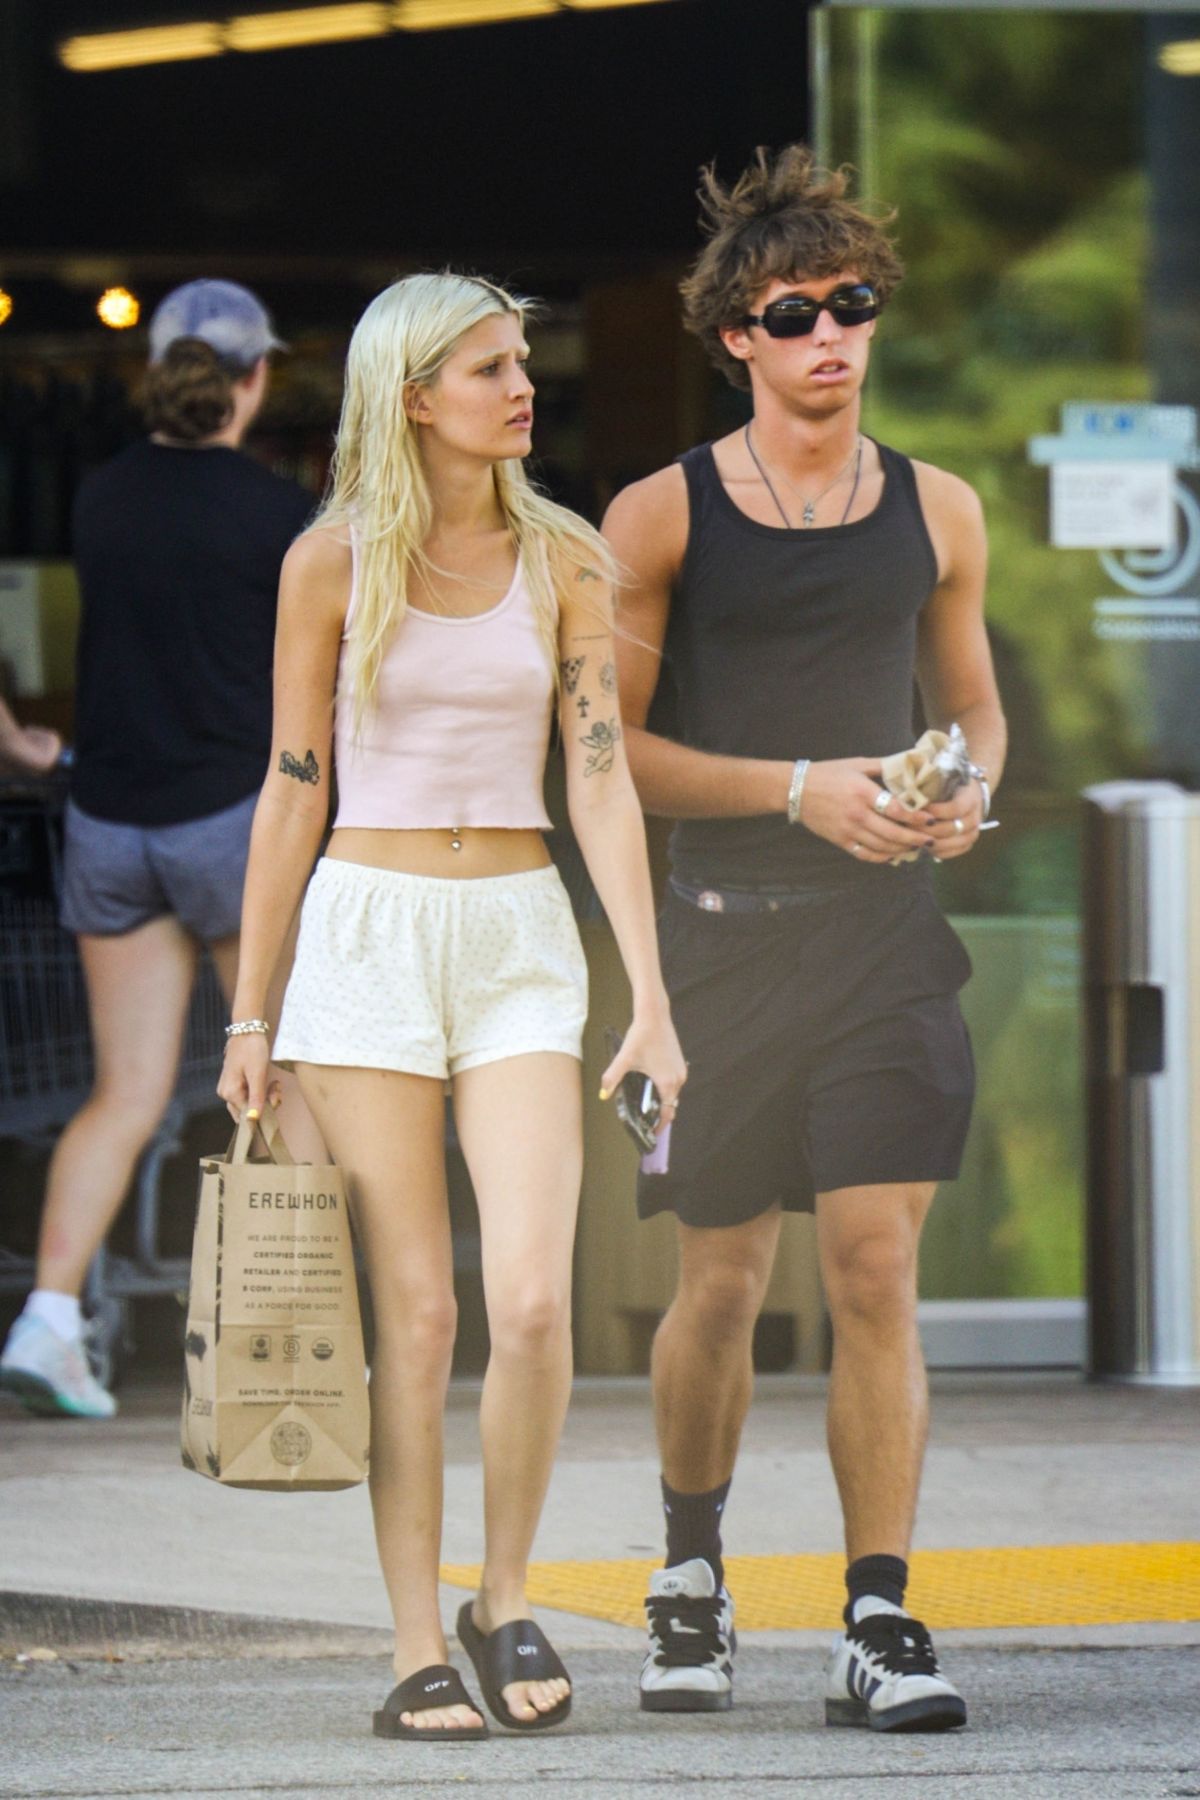 Sami Sheen out with her boyfriend at Erewhon Market